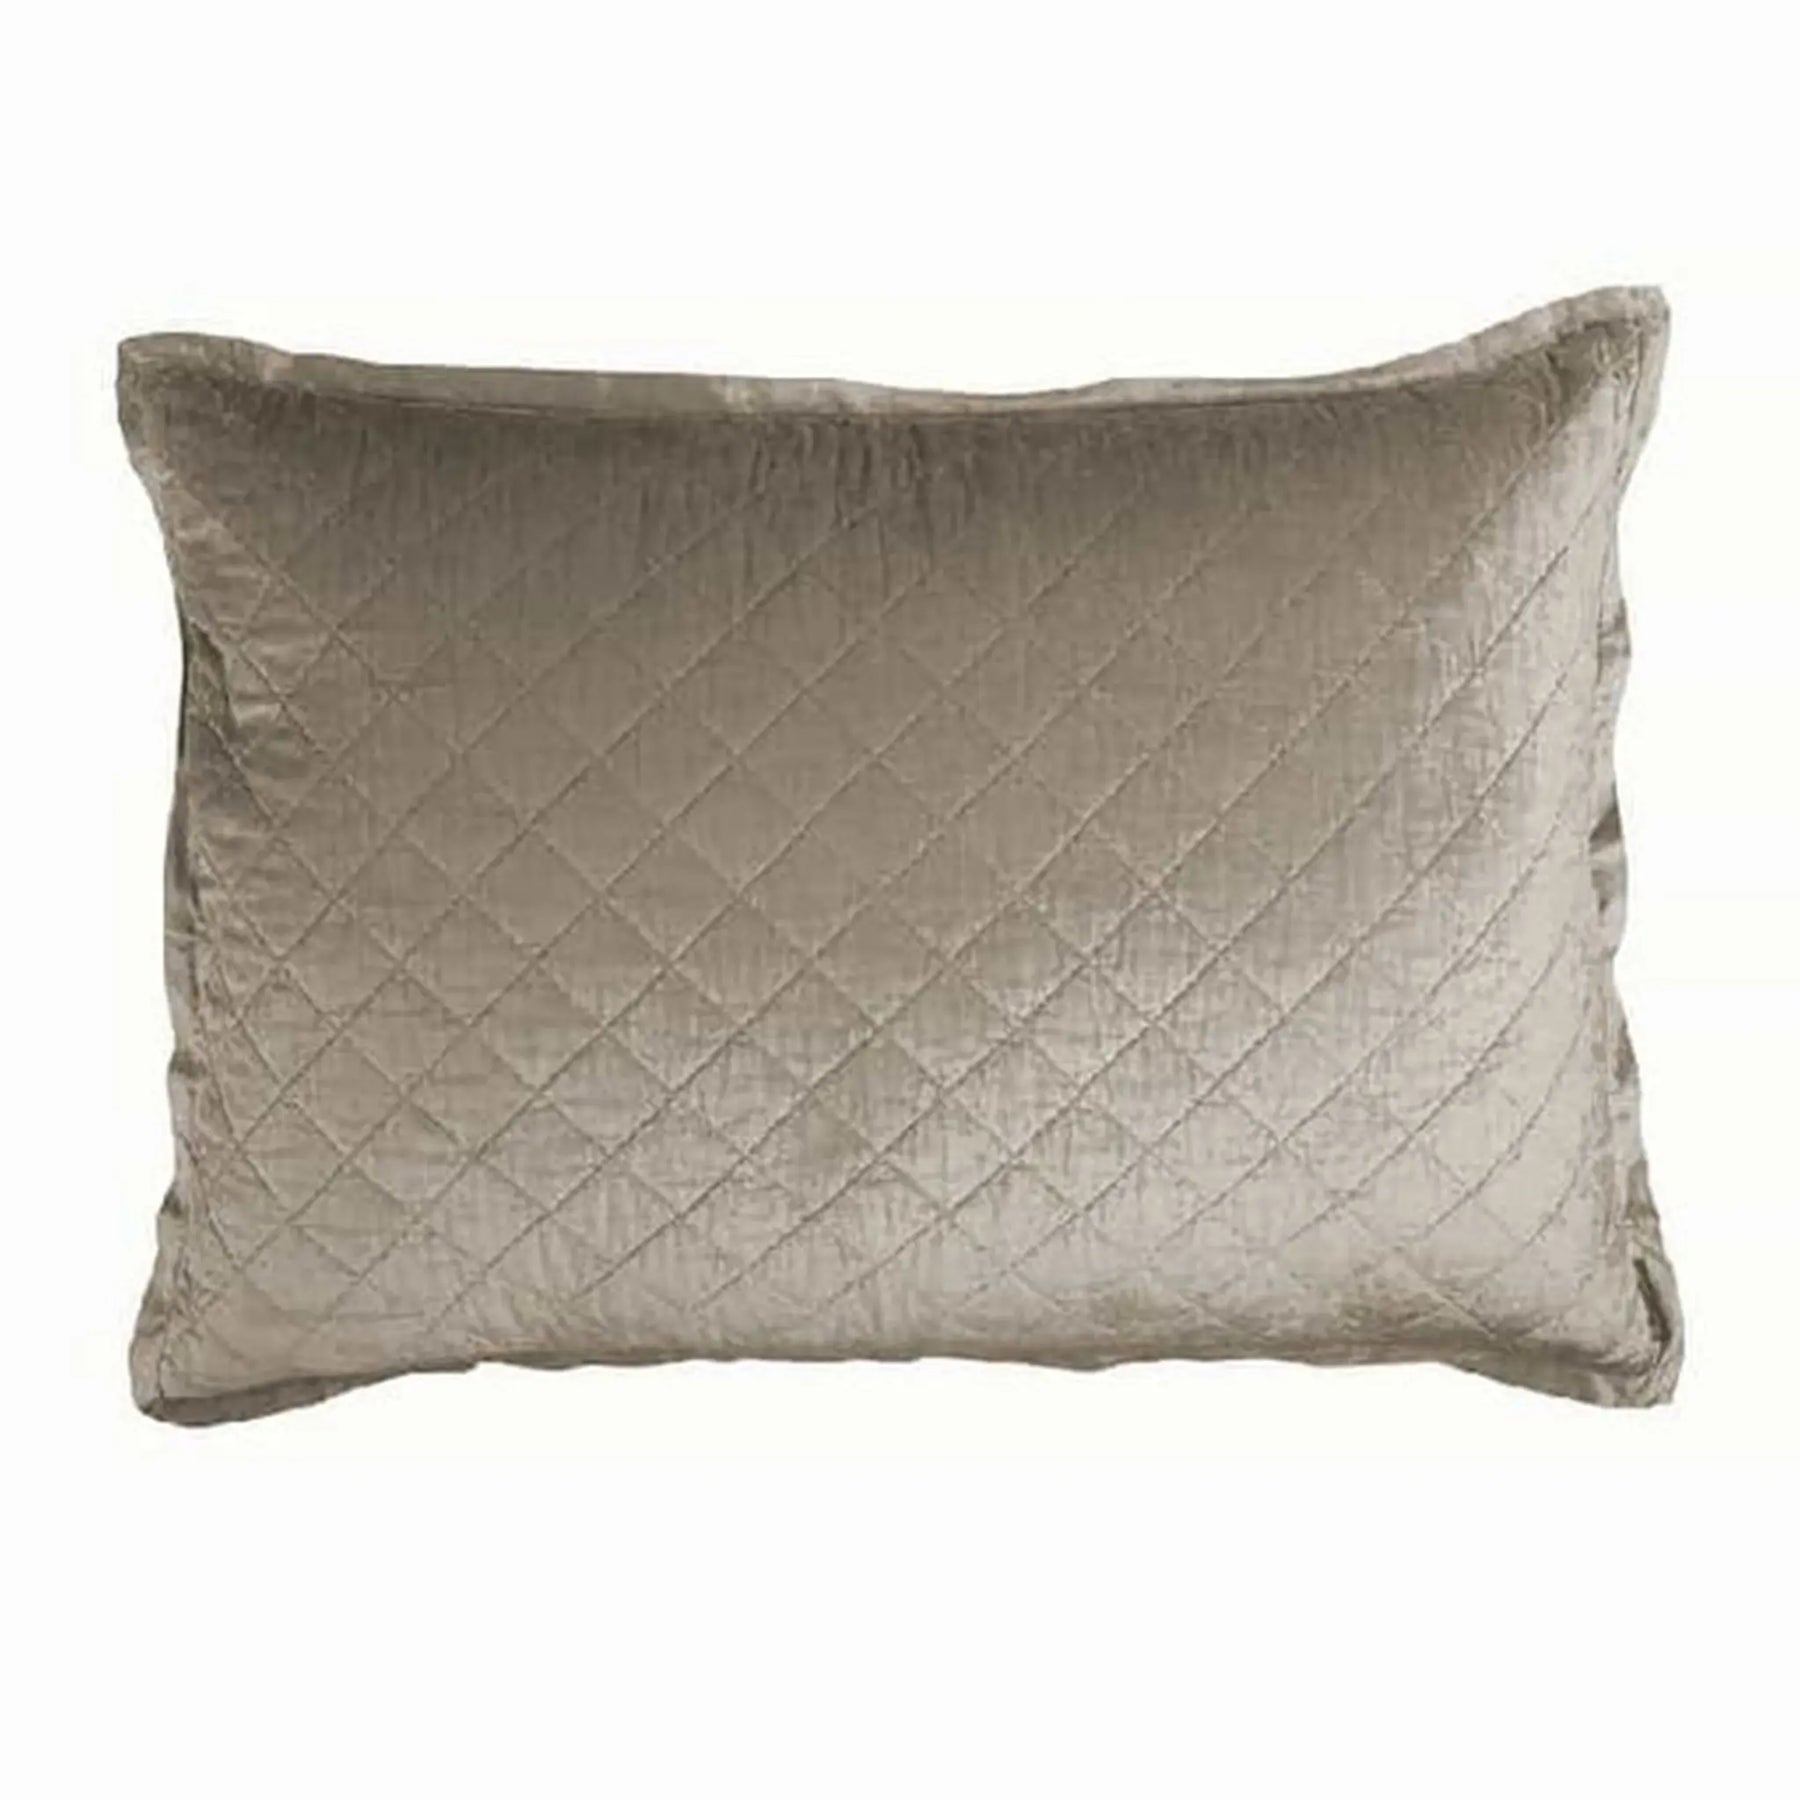 Lili Alessandra Chloe Diamond Quilted Luxe Euro Pillow in Fawn